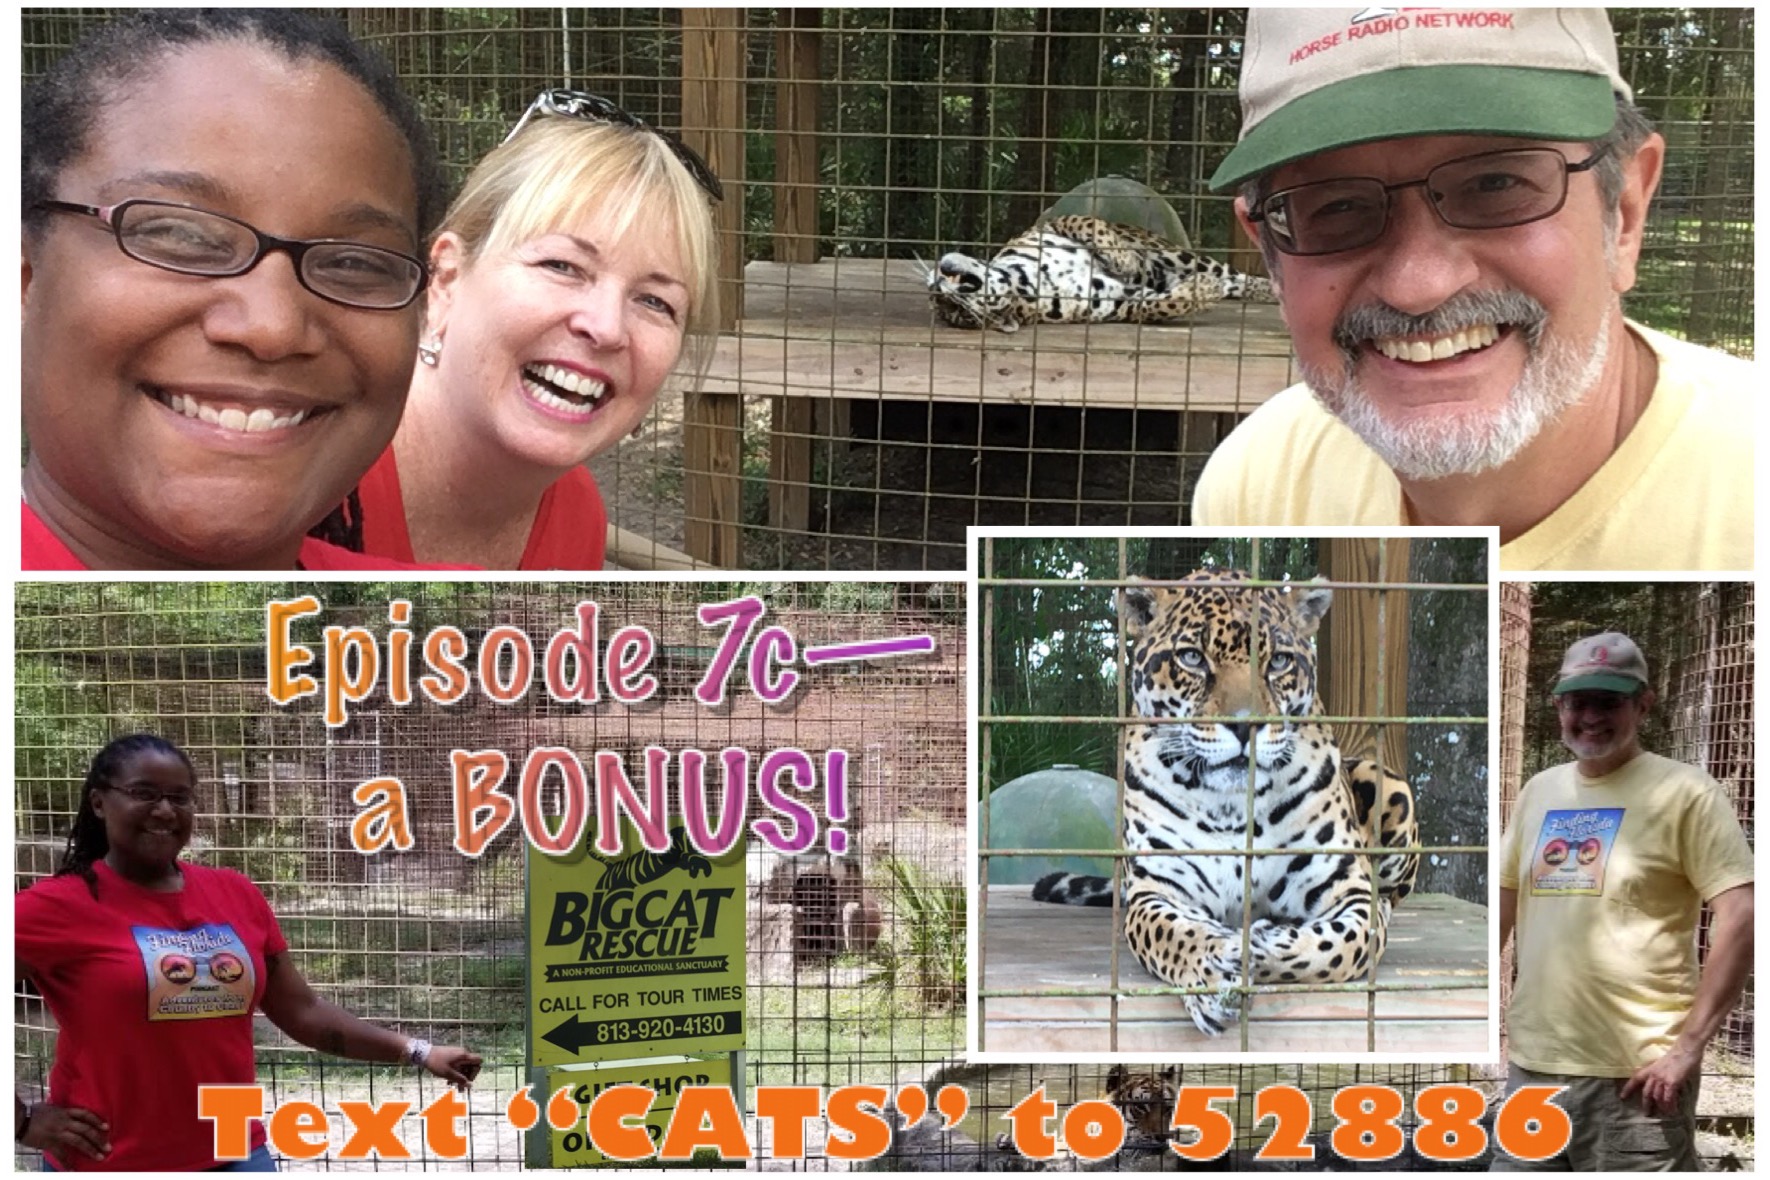 One of the Biggest Accredited Sanctuaries Dedicated to Big Cats!